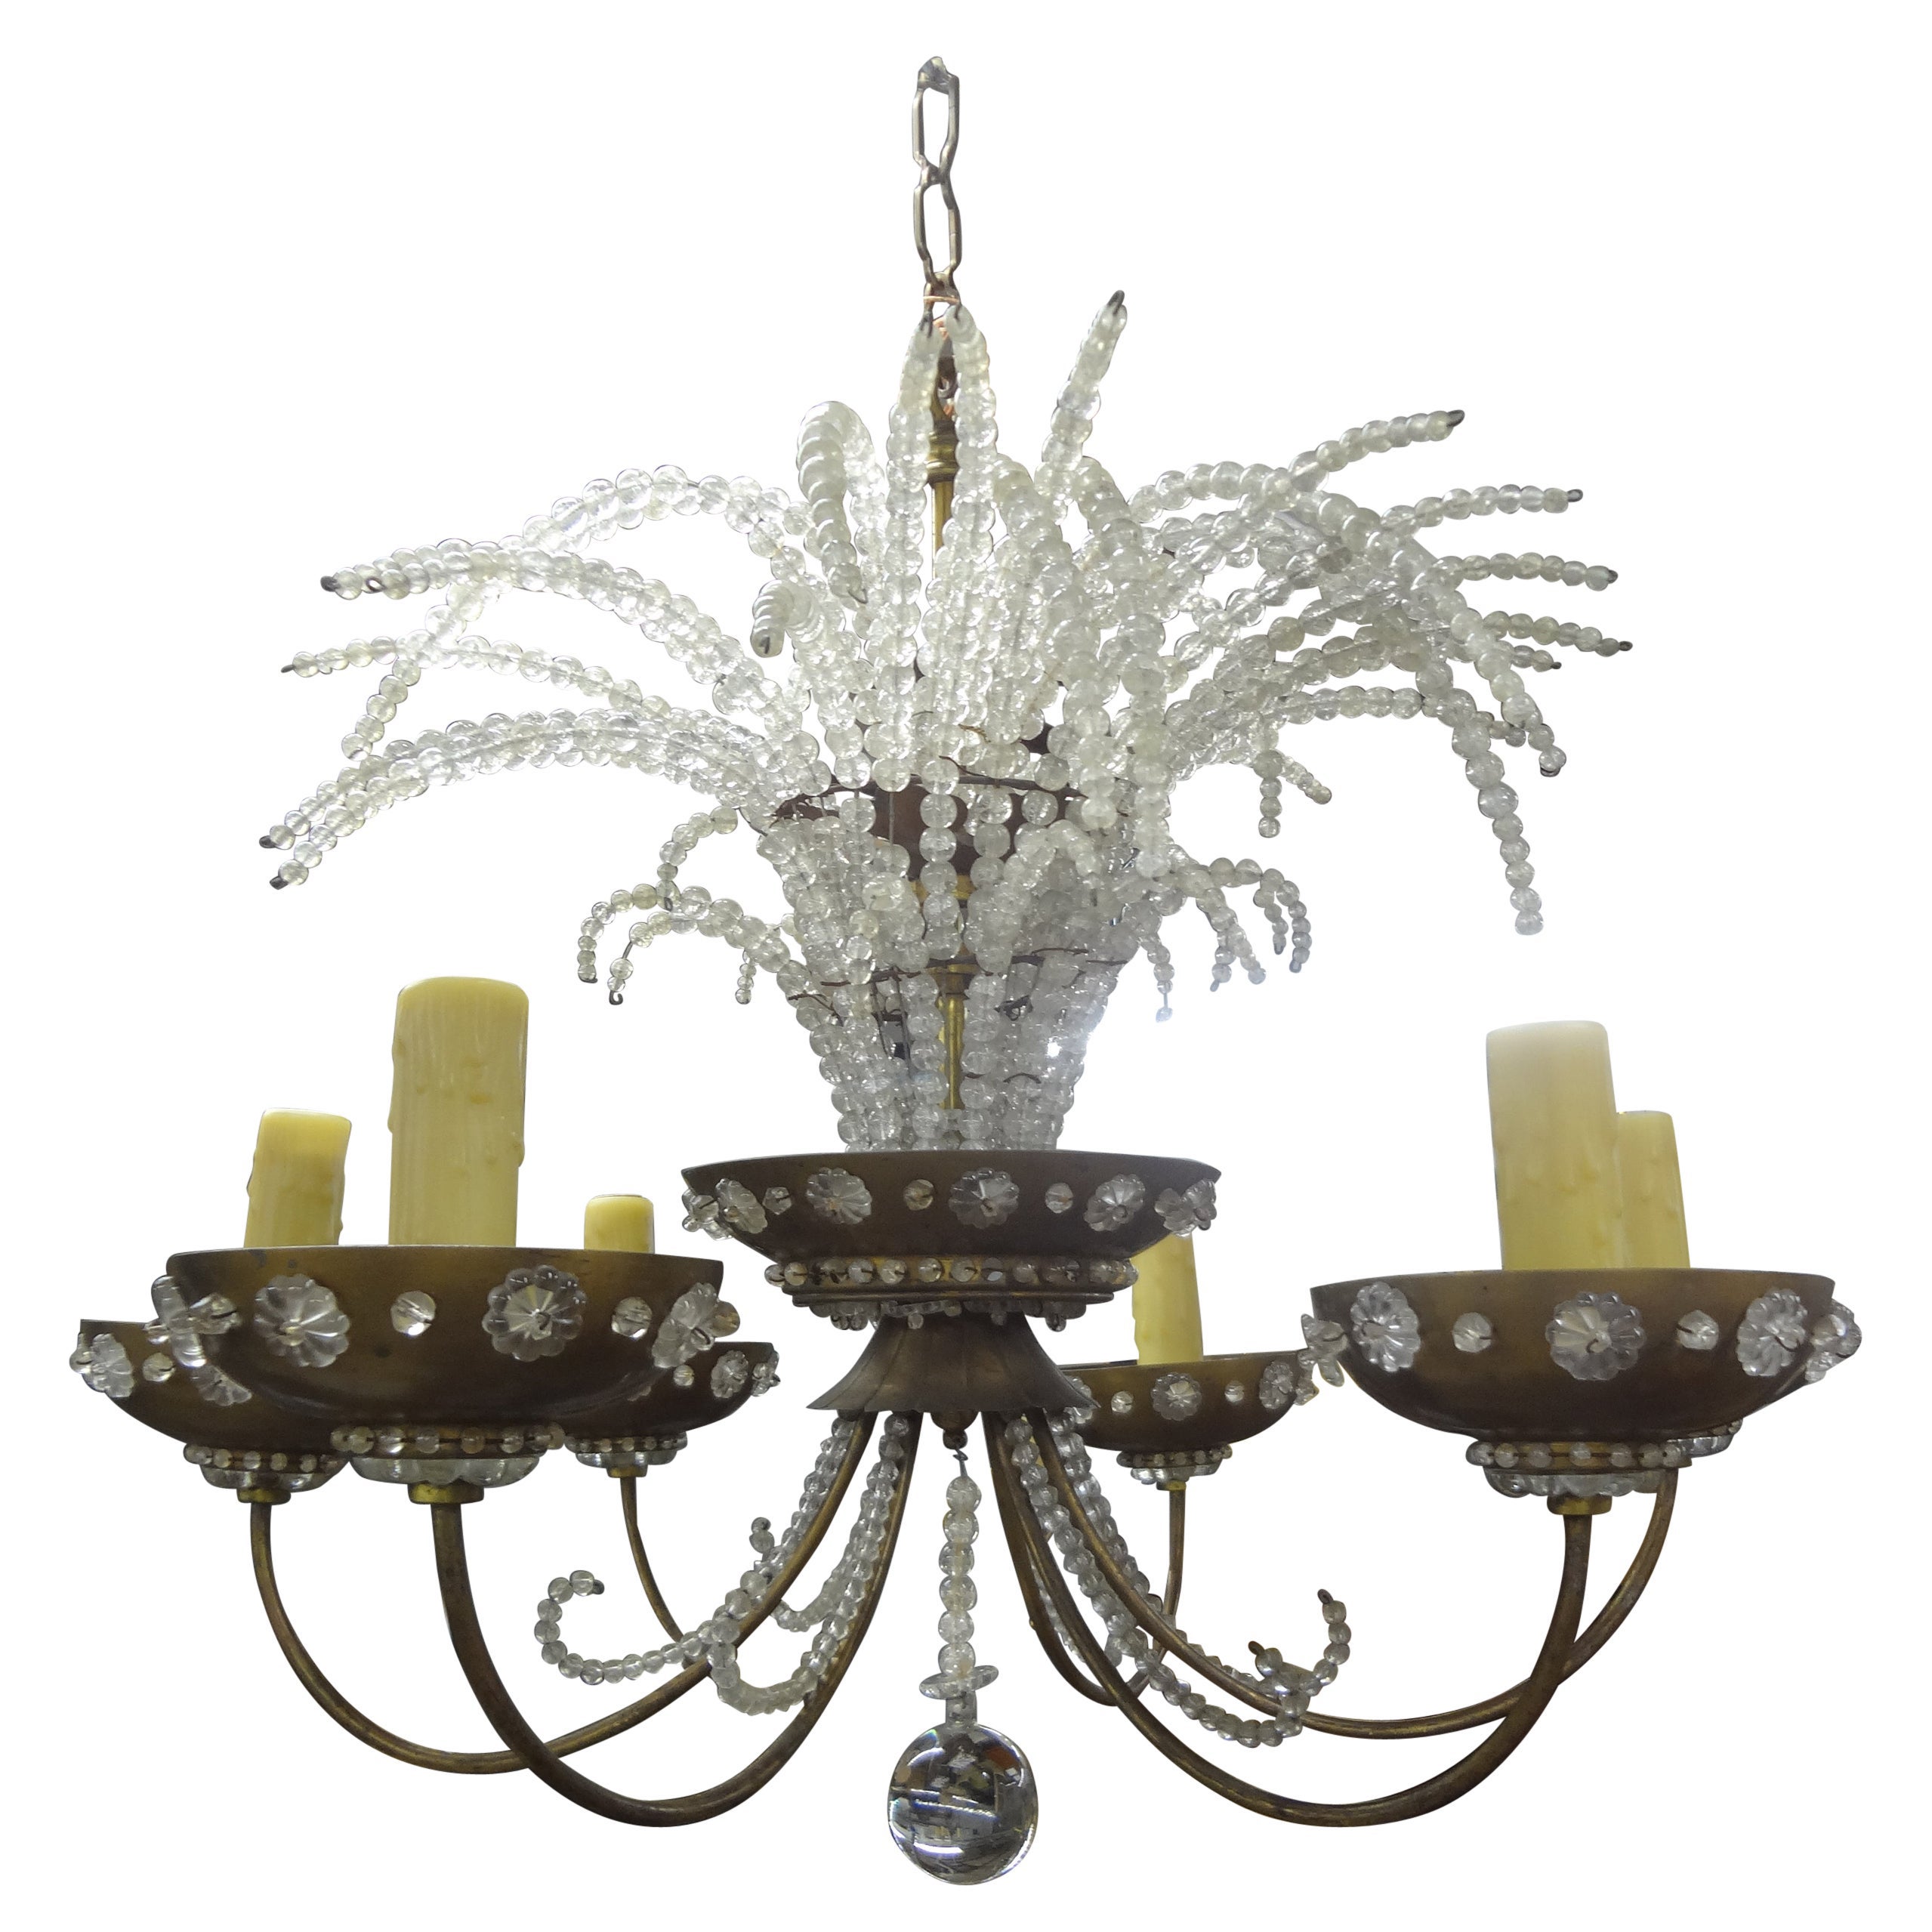 French Maison Bagues Beaded Crystal Chandelier